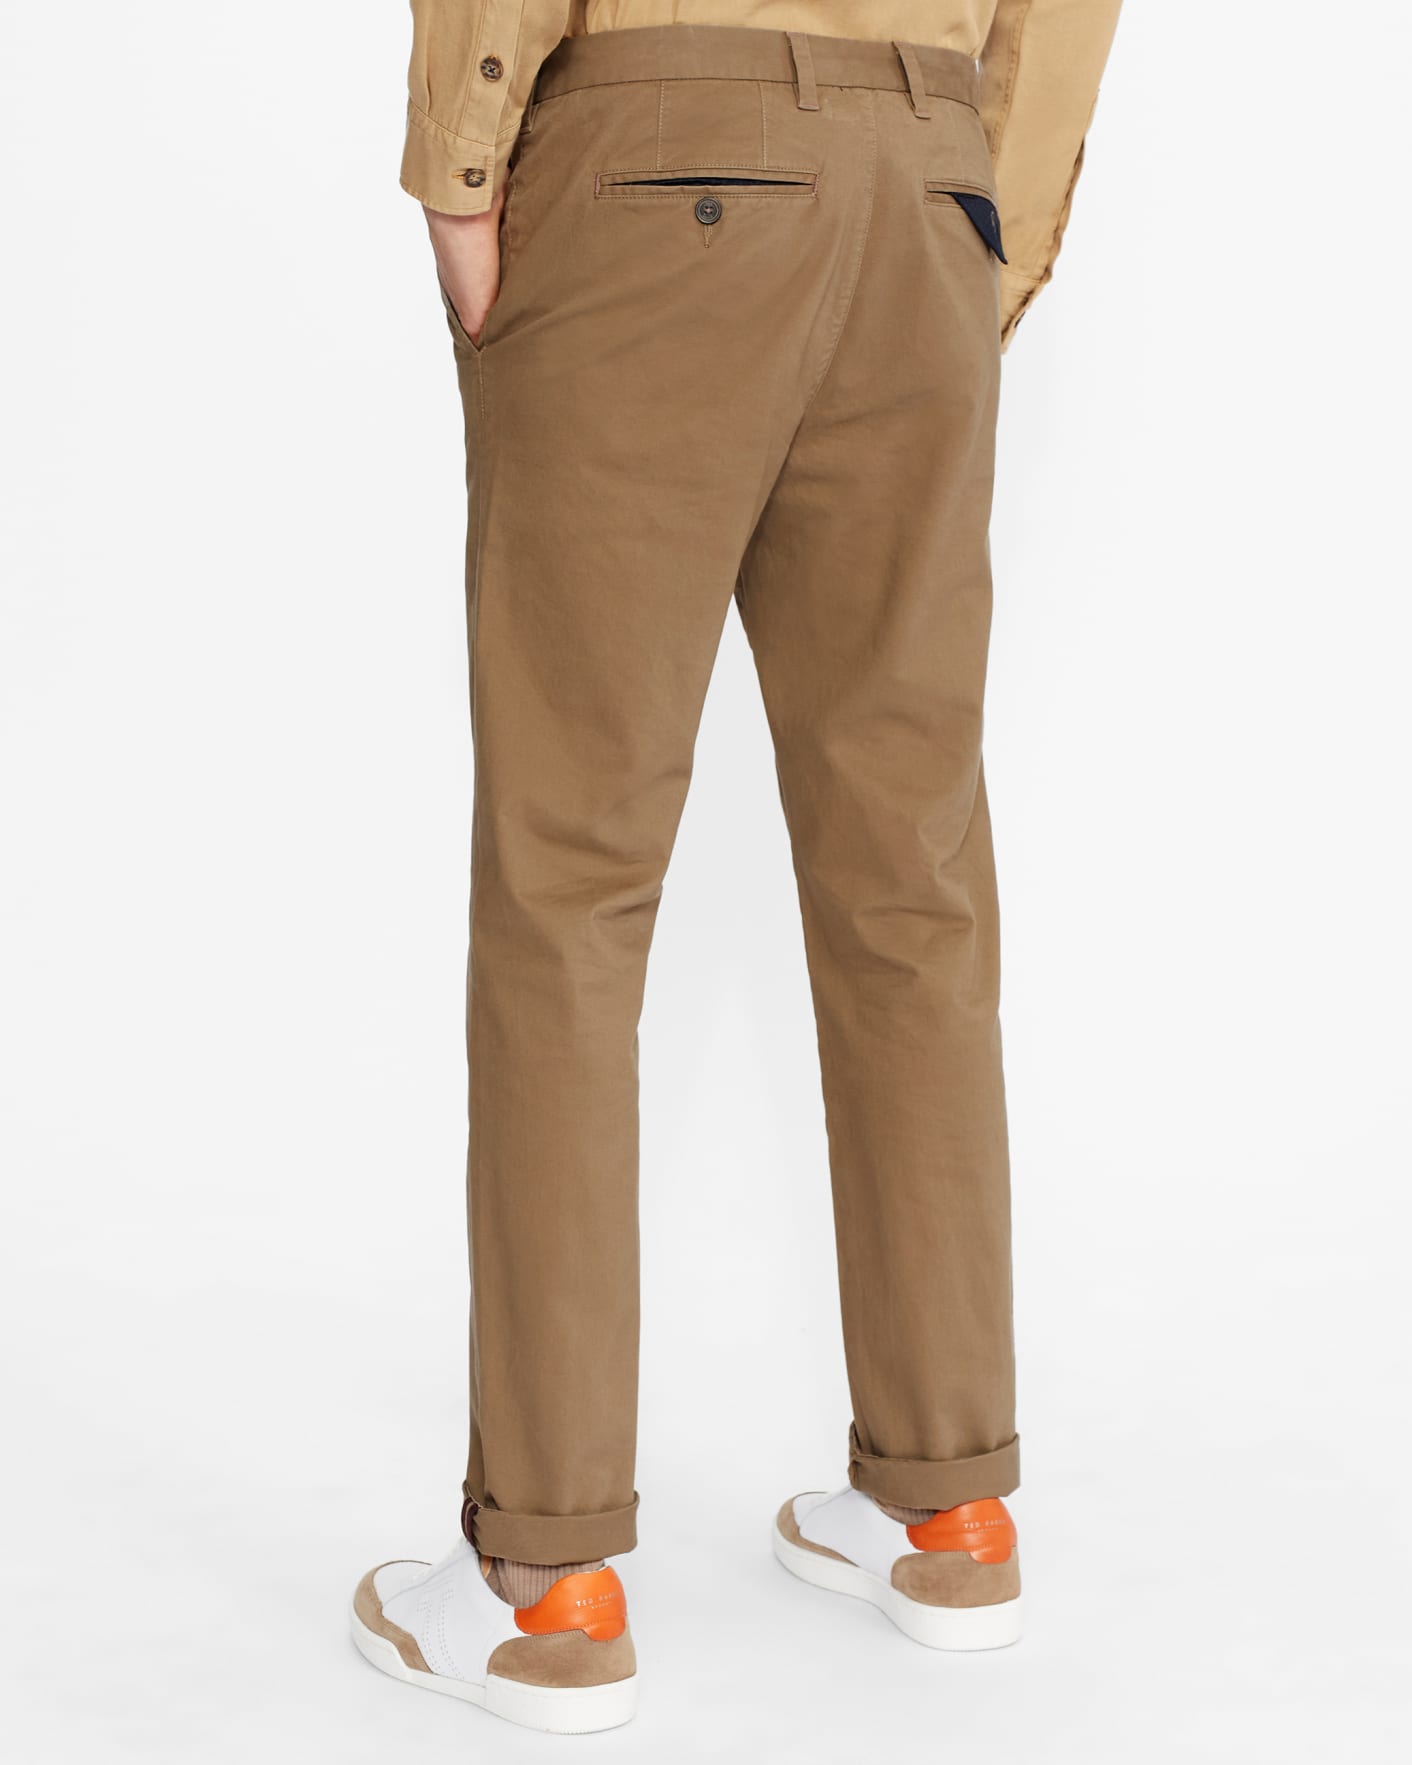 NATURAL Slim fit chinos Ted Baker